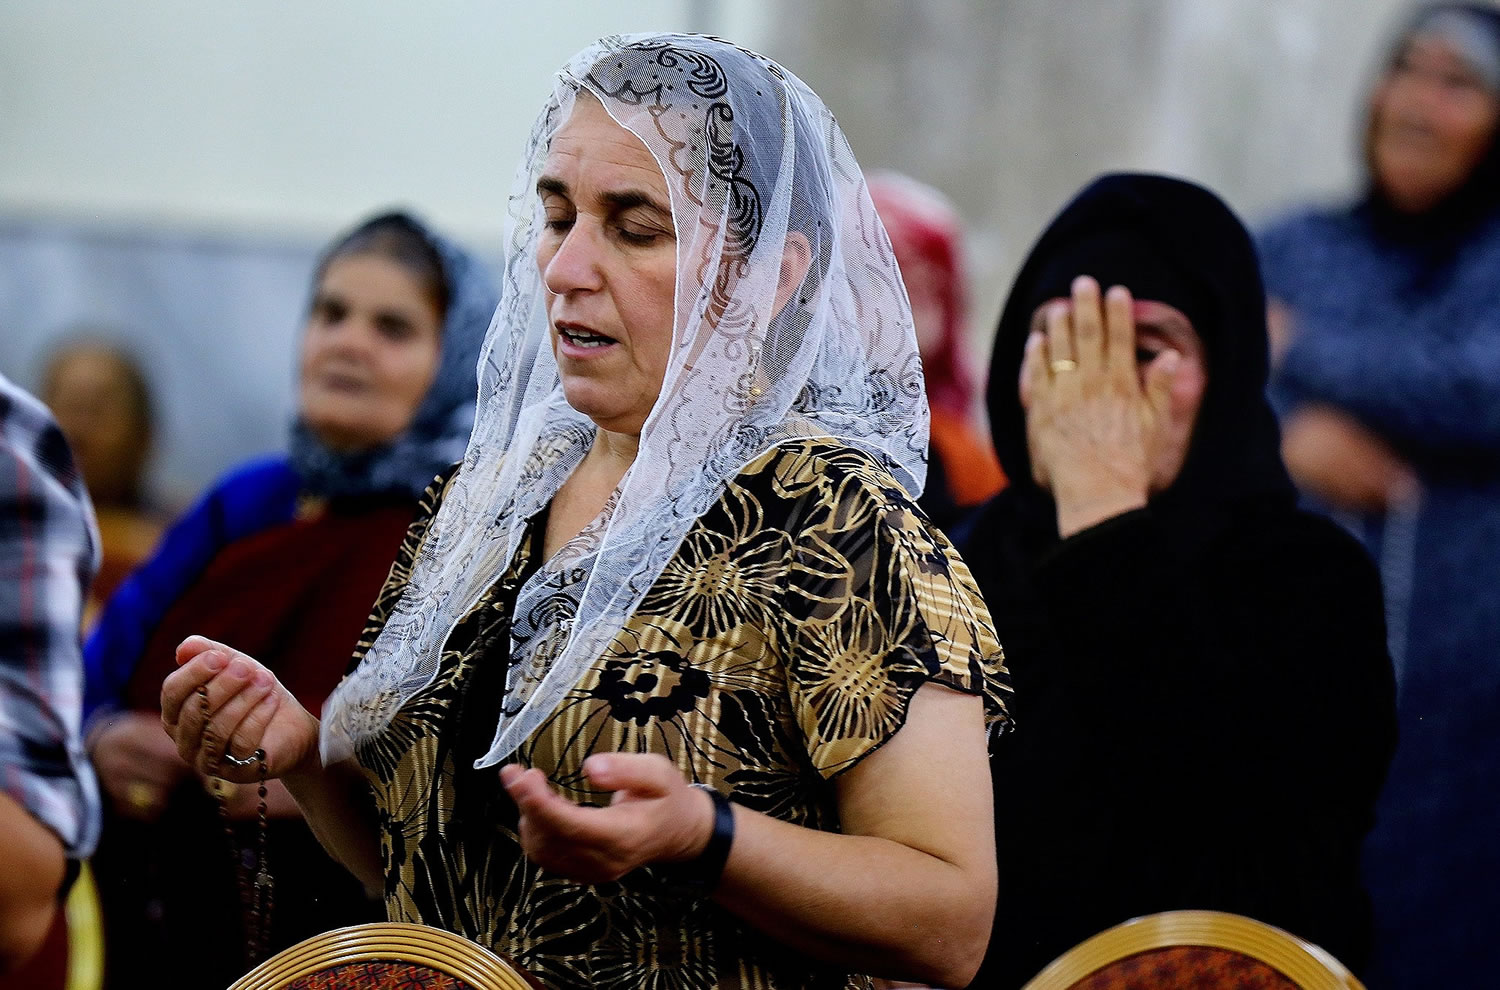 Displaced Christians who fled the violence in Mosul pray Saturday at Mar Aframa church in the town of Qaraqoush on the outskirts of Mosul. Iraq was home to an estimated 1 million Christians before the 2003 U.S.-led invasion that ousted Saddam Hussein.  Since then, militants have frequently targeted Christians across the country, bombing their churches and killing clergymen. Under such pressures, many Christians have left the country.